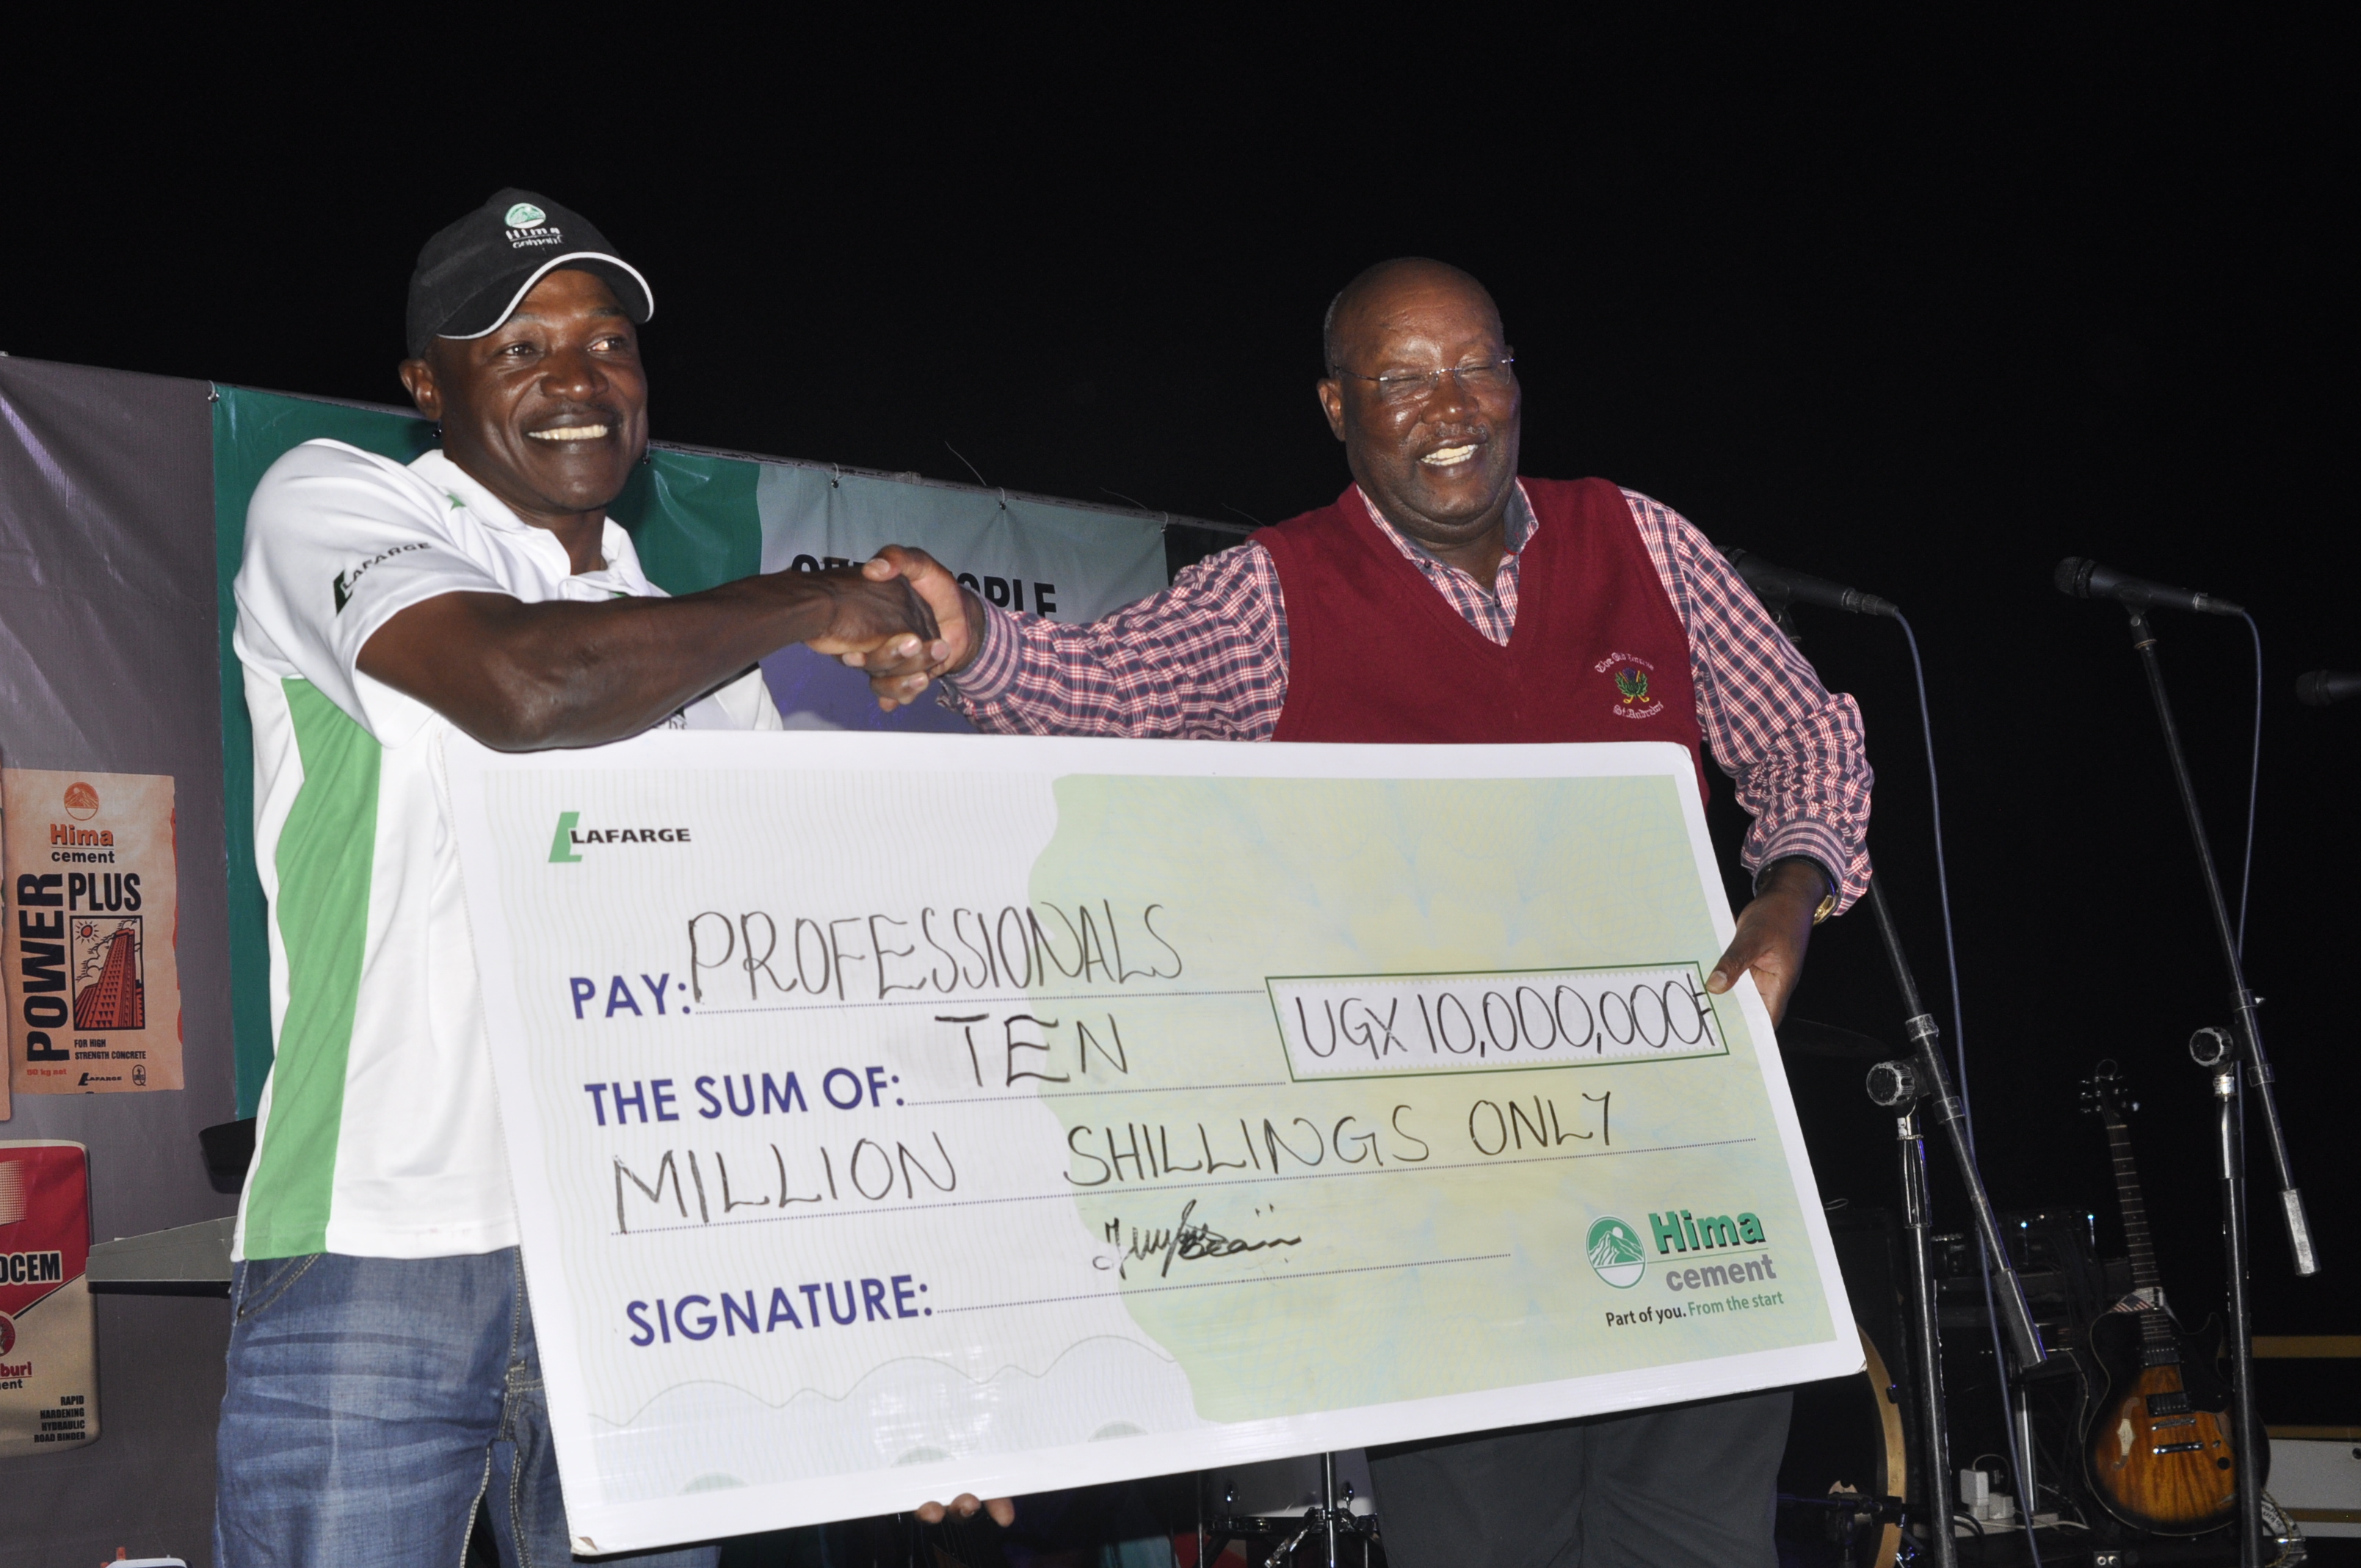 Herman Mutaawe Wins Pros Gong at 2017 Hima Cement Captain’s Prize